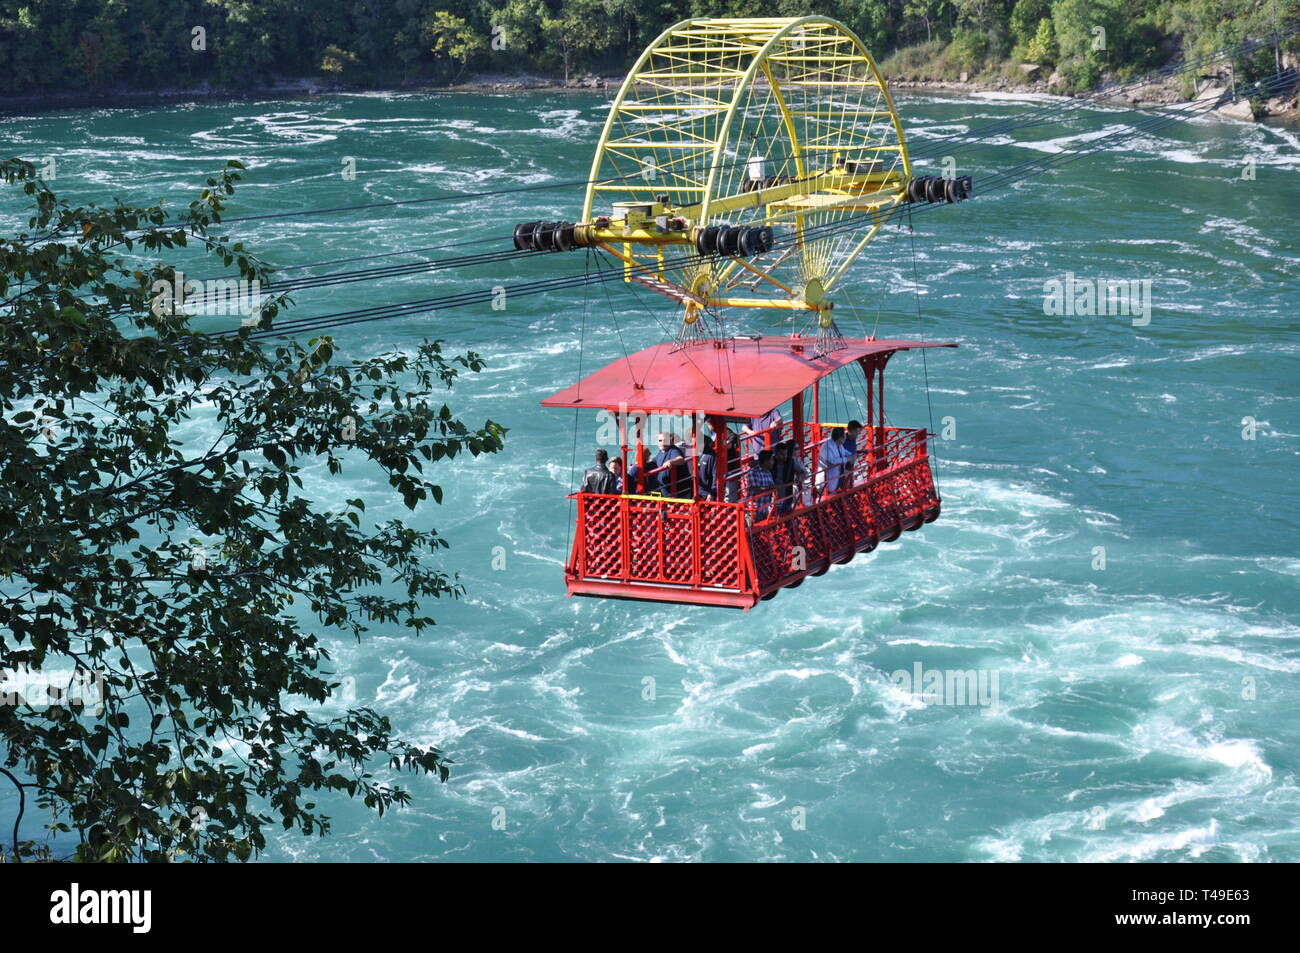 View of the Spanish Aero Car or Cable Car over the Niagara River Whirlpool near Niagara Falls between Canada and the United States Stock Photo